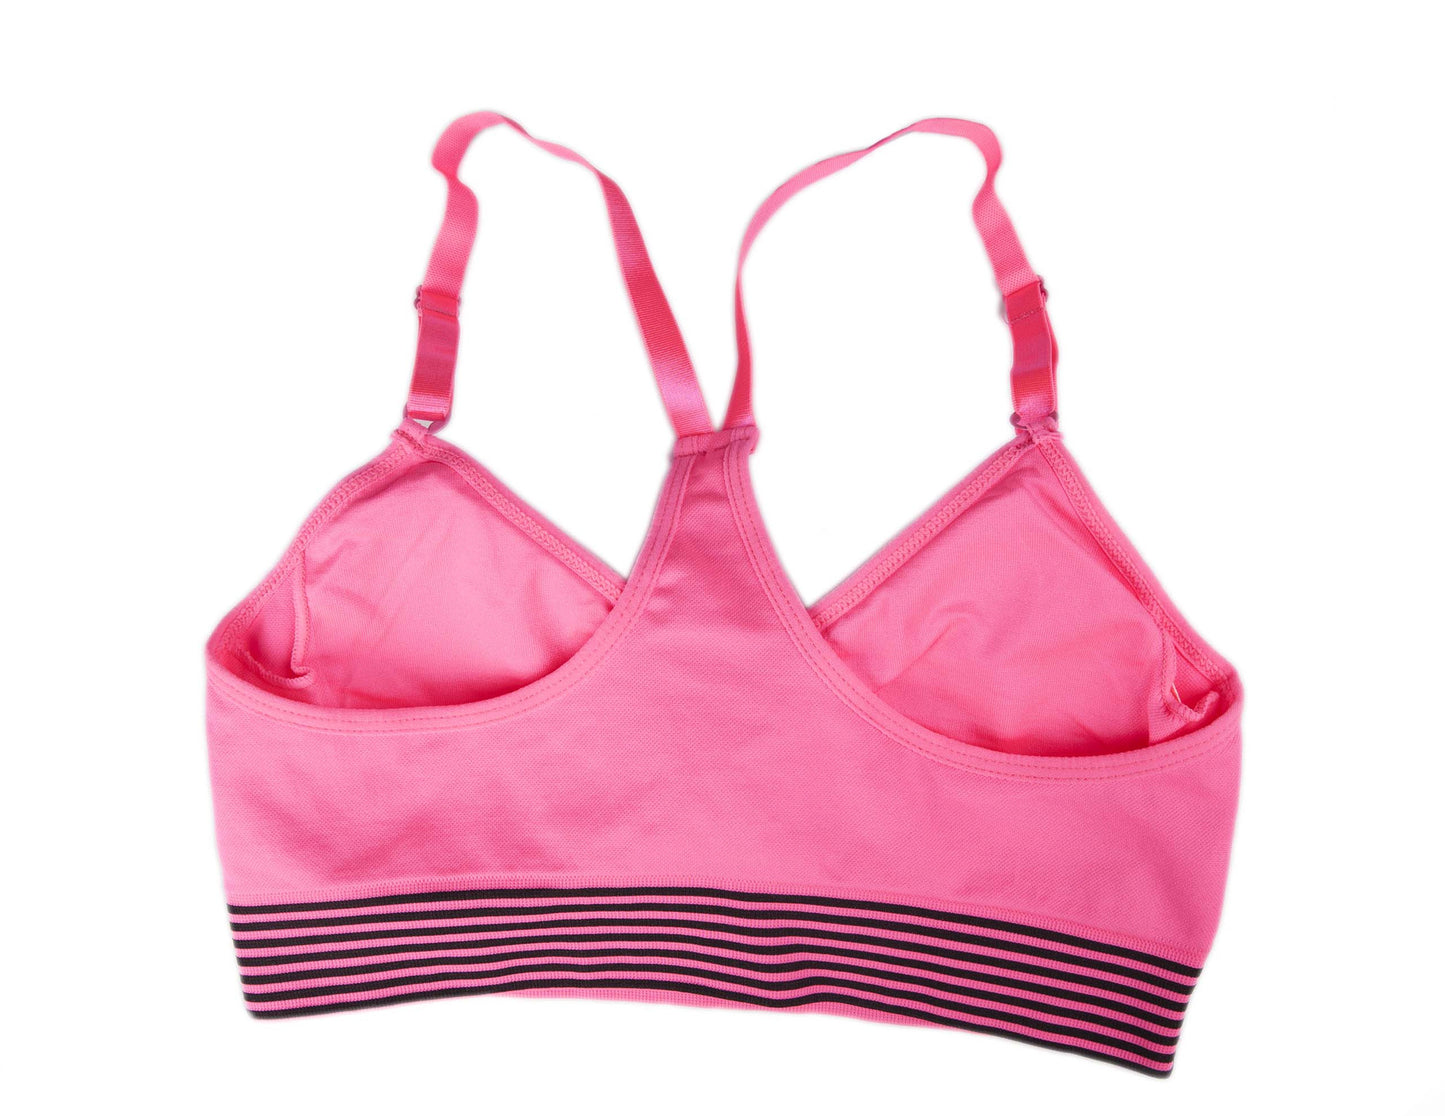 Low Impact Hot Pink and Black Sports Bra